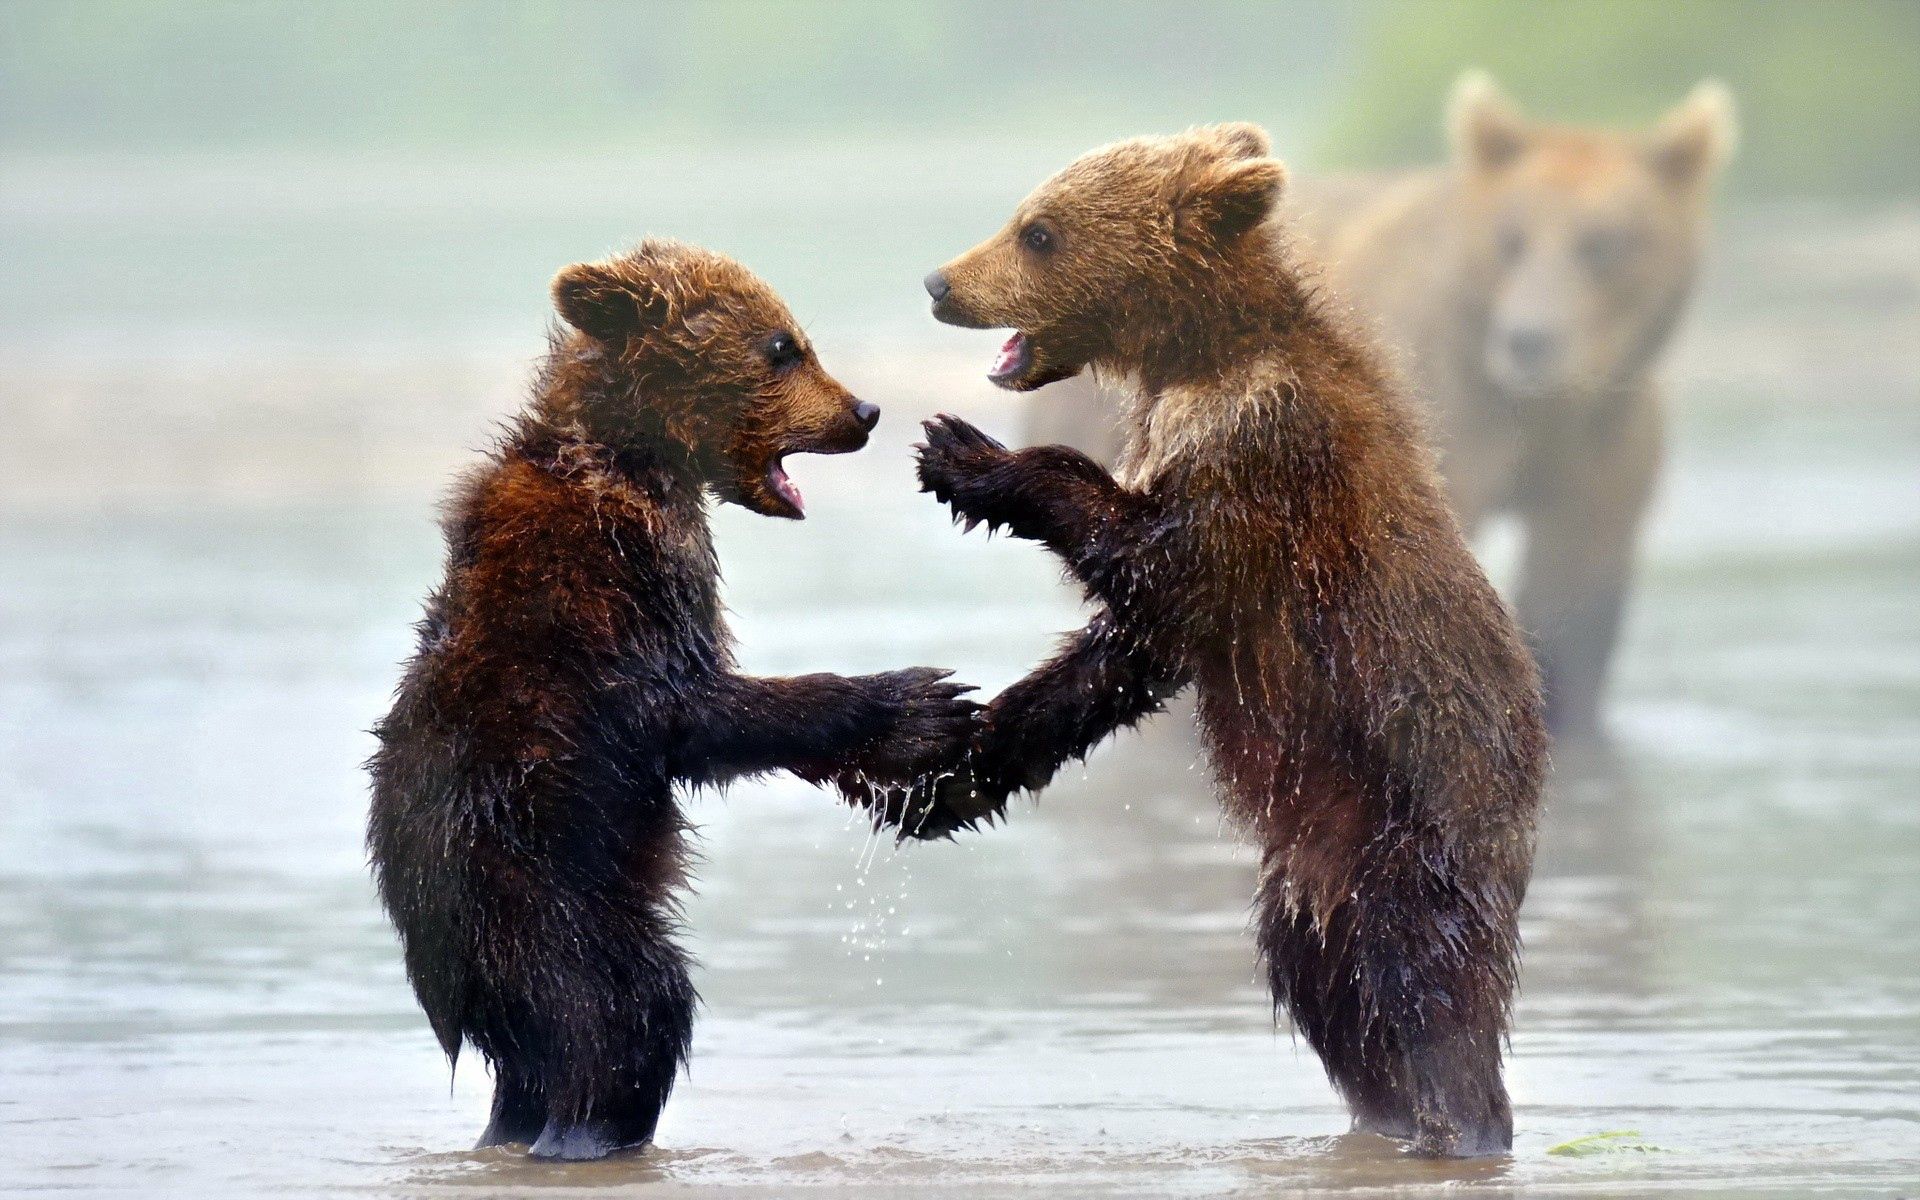 bears, animals, water, young, fog, cubs, teddy bears cellphone